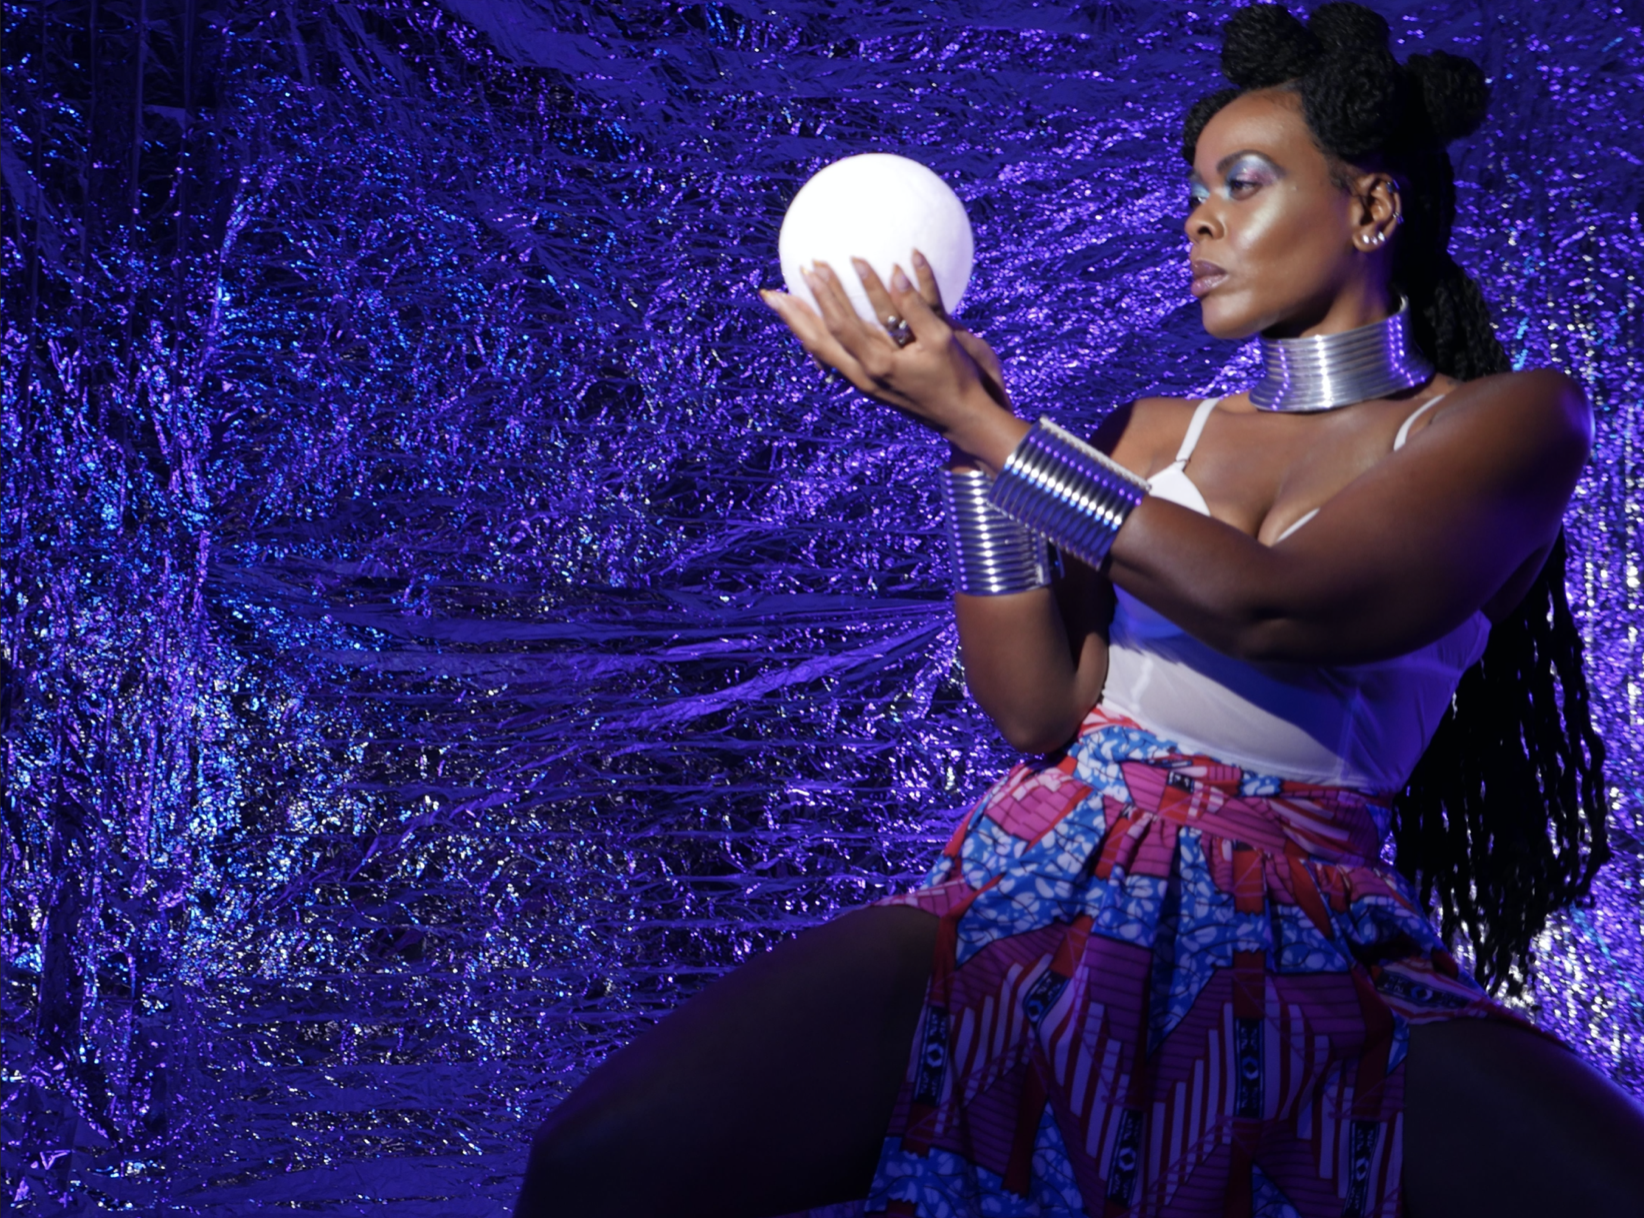 Featured image: A still from, "God is a Black Woman" by Chaz Shermil Hodges. A Black woman holds a white crystal ball against a sparkly purple back drop. She is wearing a blue and pink skirt, a white bustier and silver-ringed bracelets and necklace, suggesting a traditional African attire.